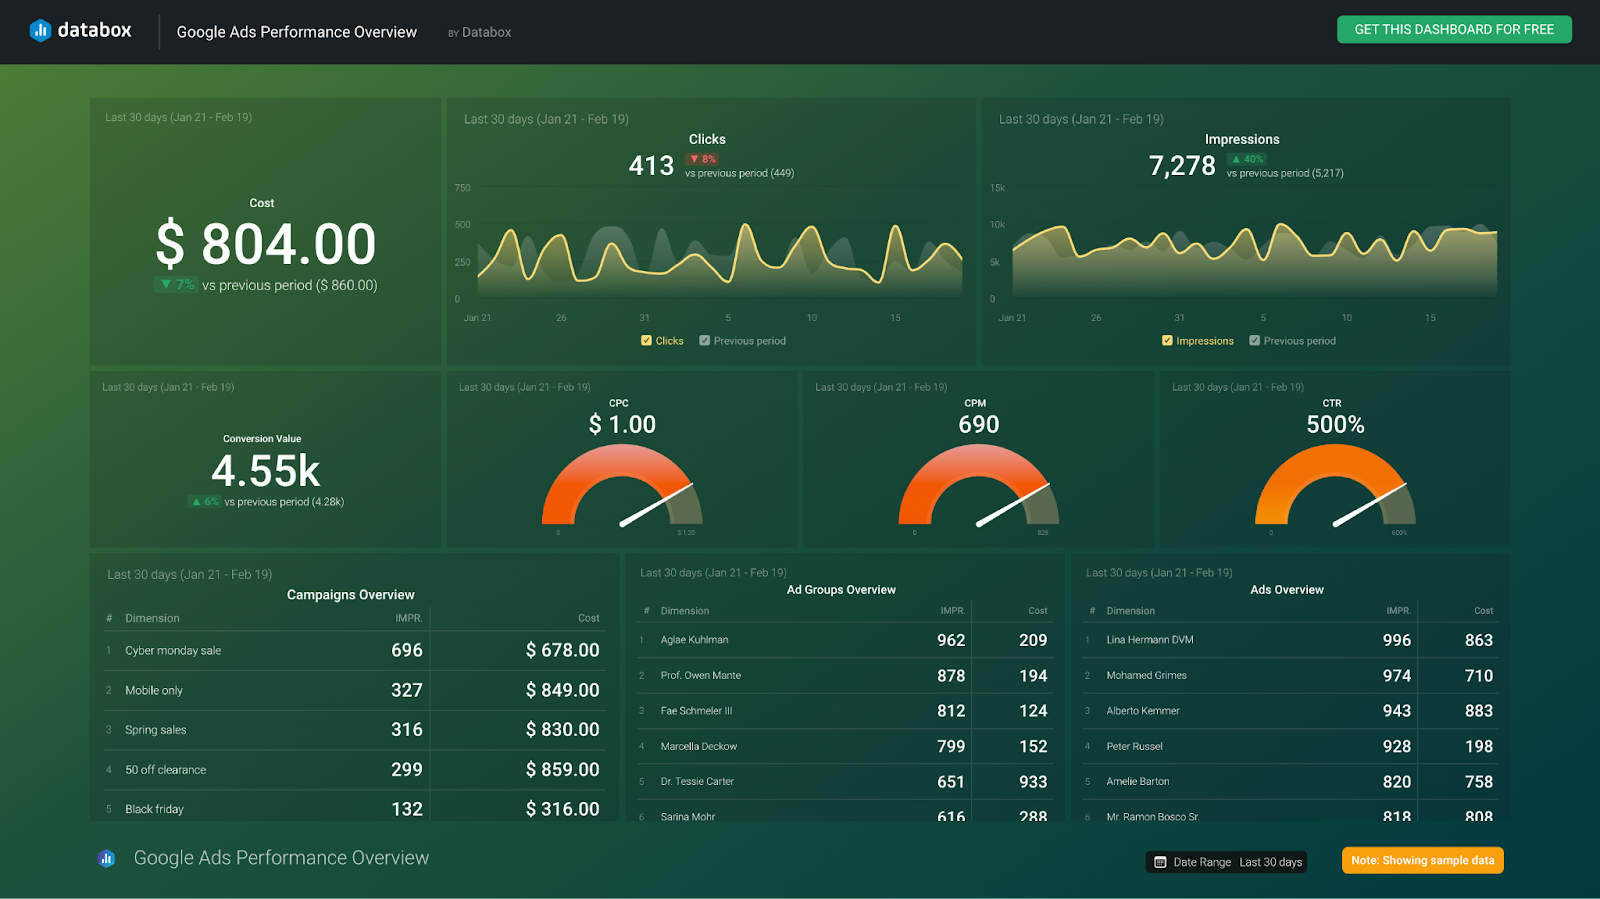 Google Ads Performance Overview dashboard 